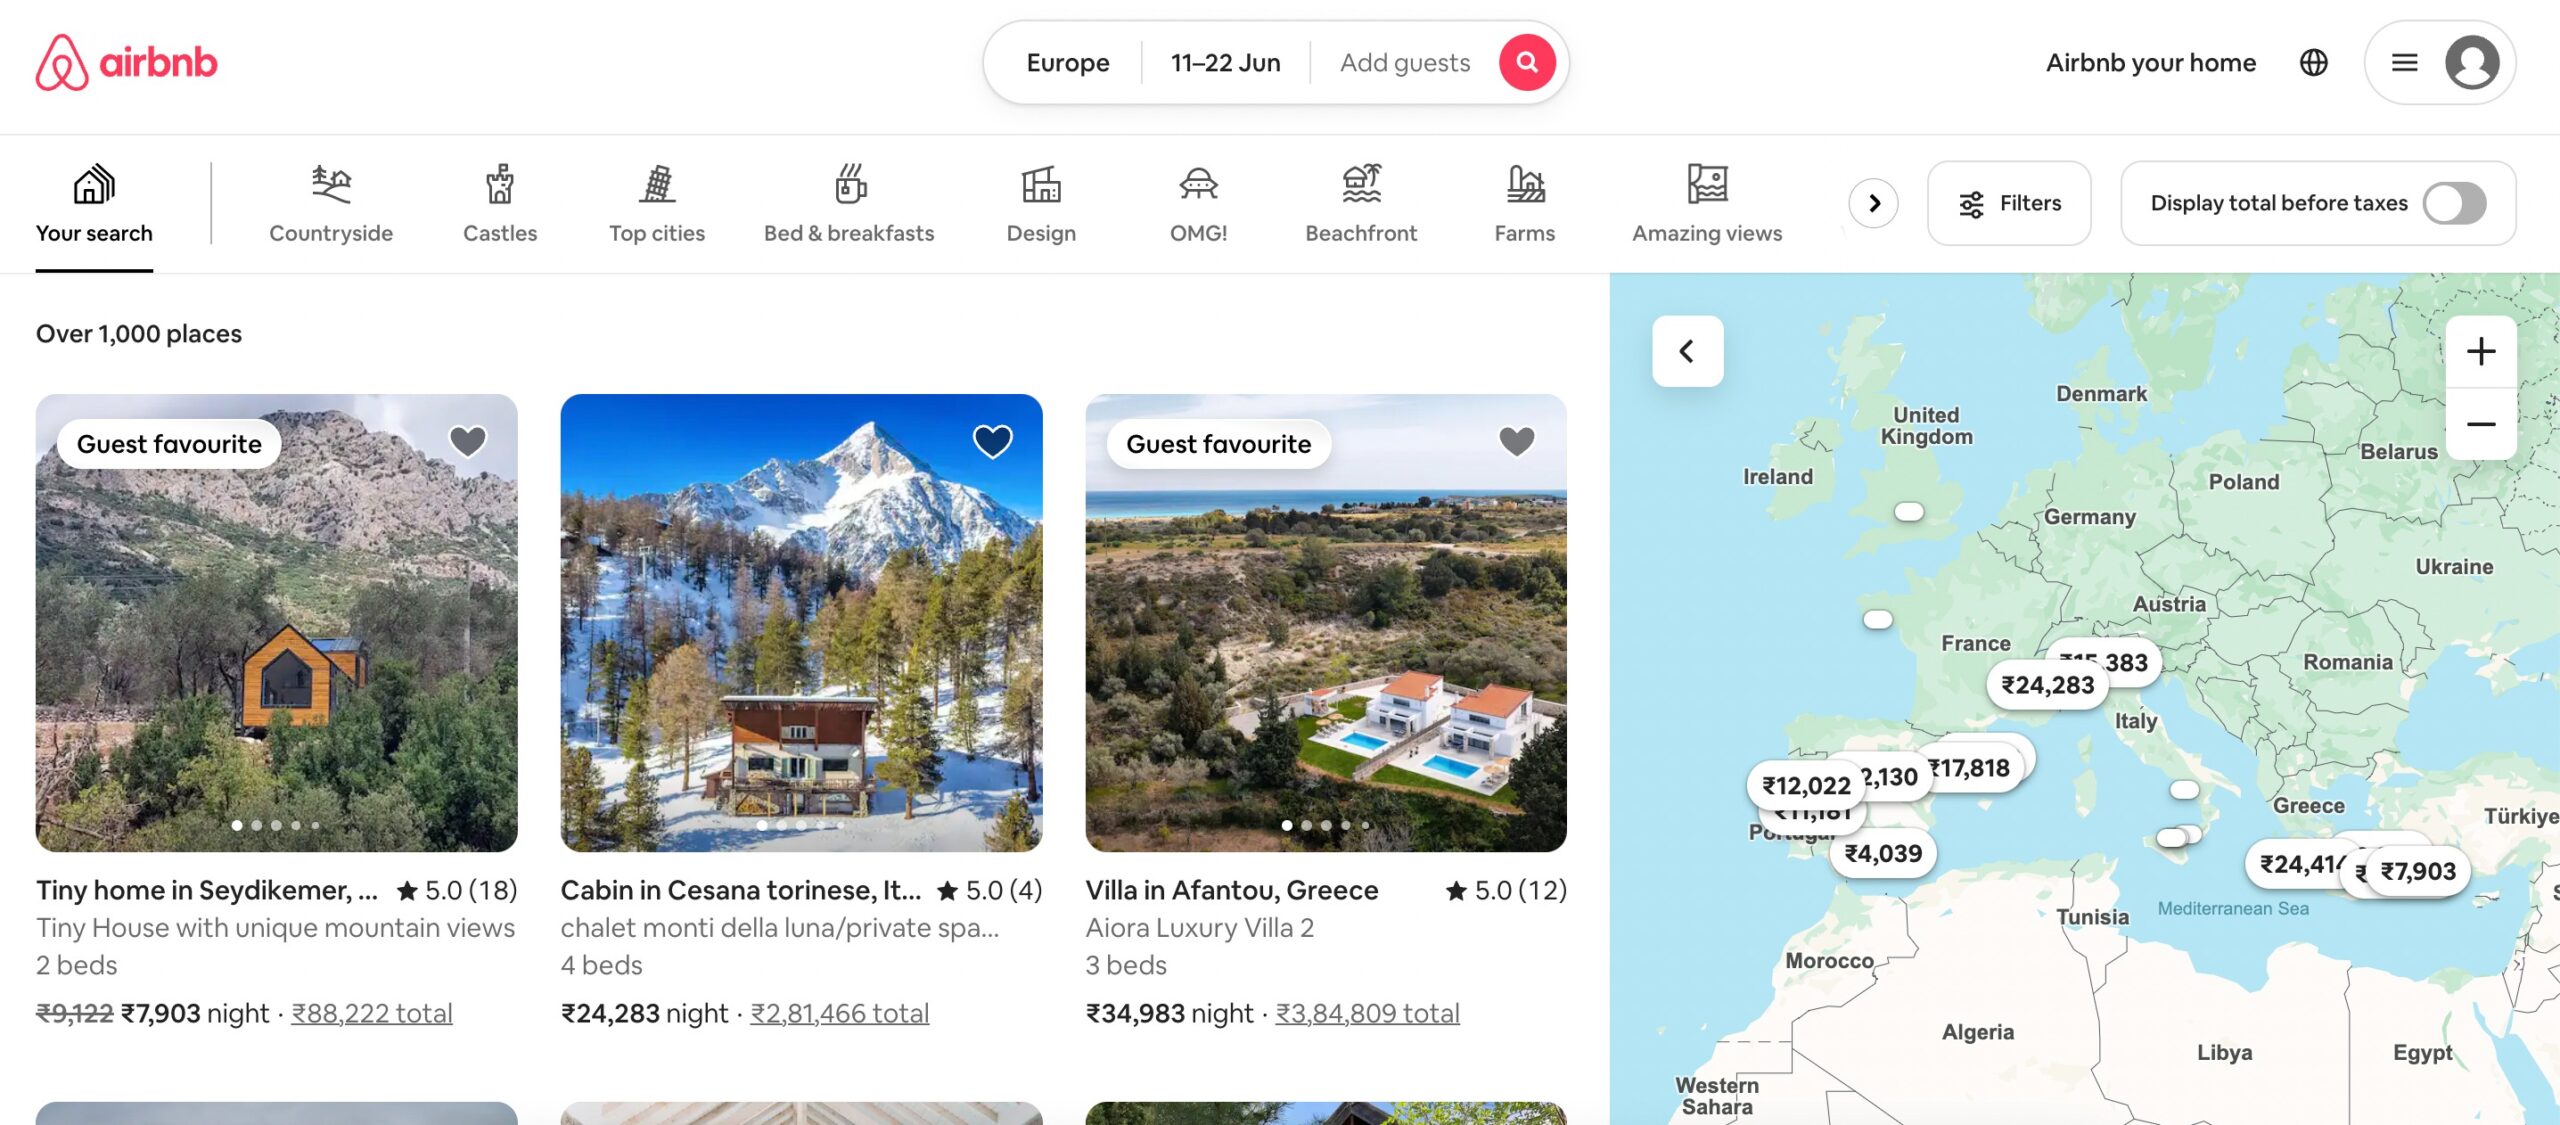 Airbnb-example of international SEO